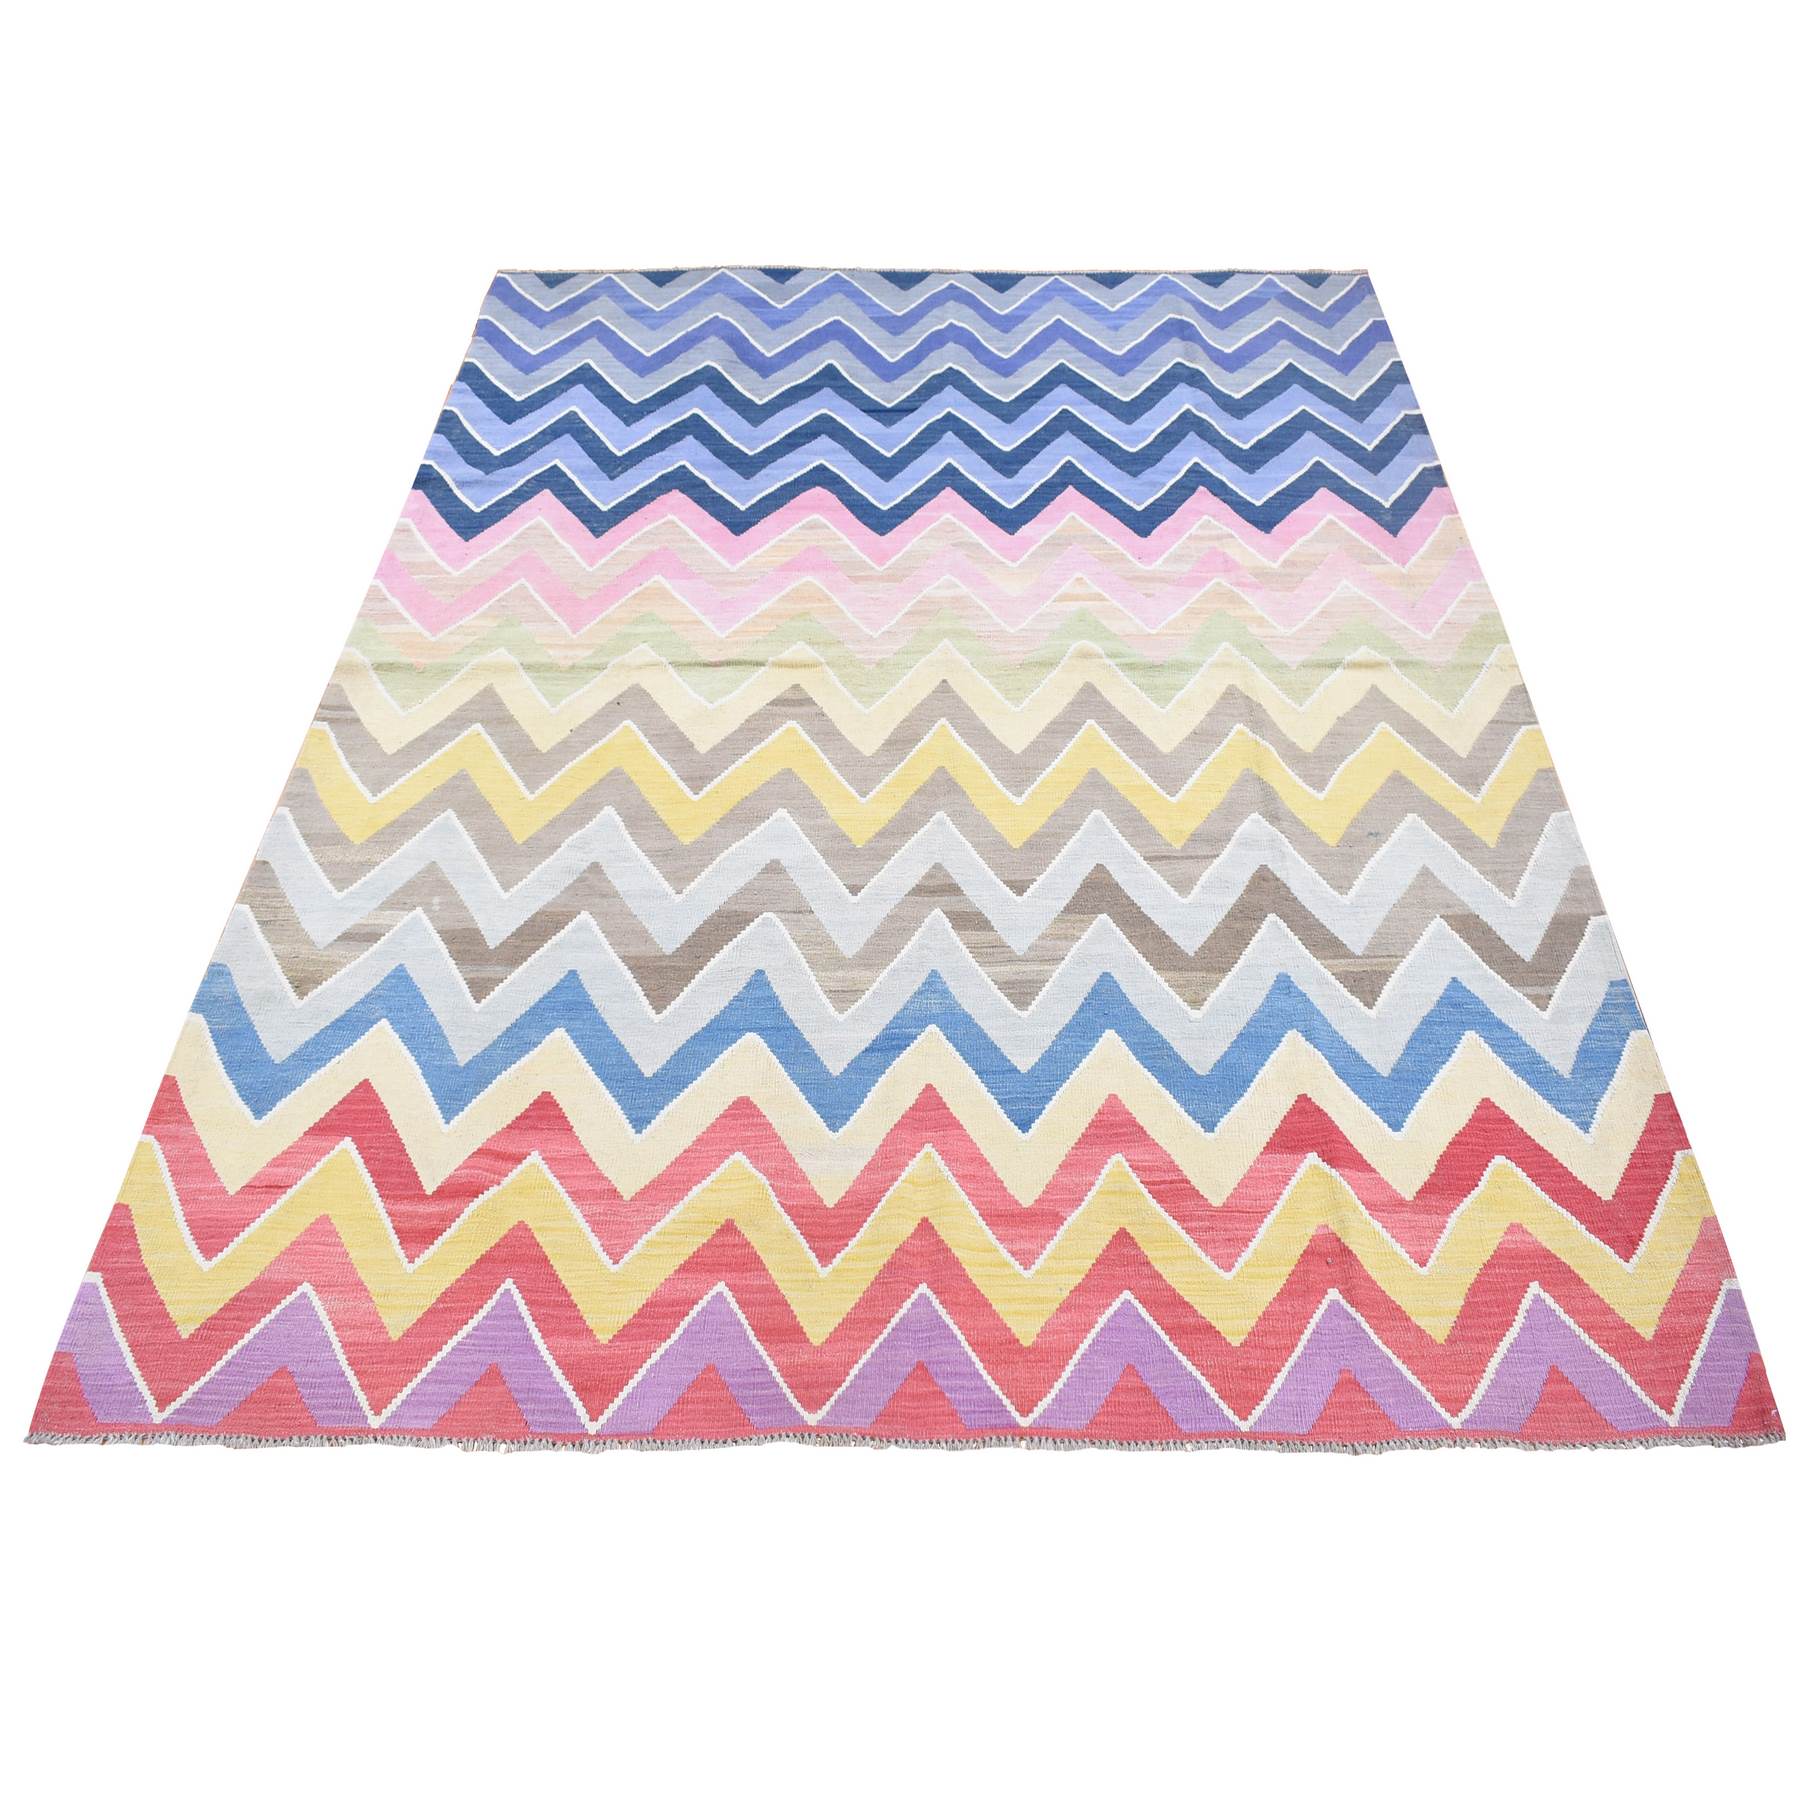 Colorful, Extra Soft Wool Hand Woven, Afghan Kilim with Chevron Design Flat Weave, Vegetable Dyes, Reversible Oriental 